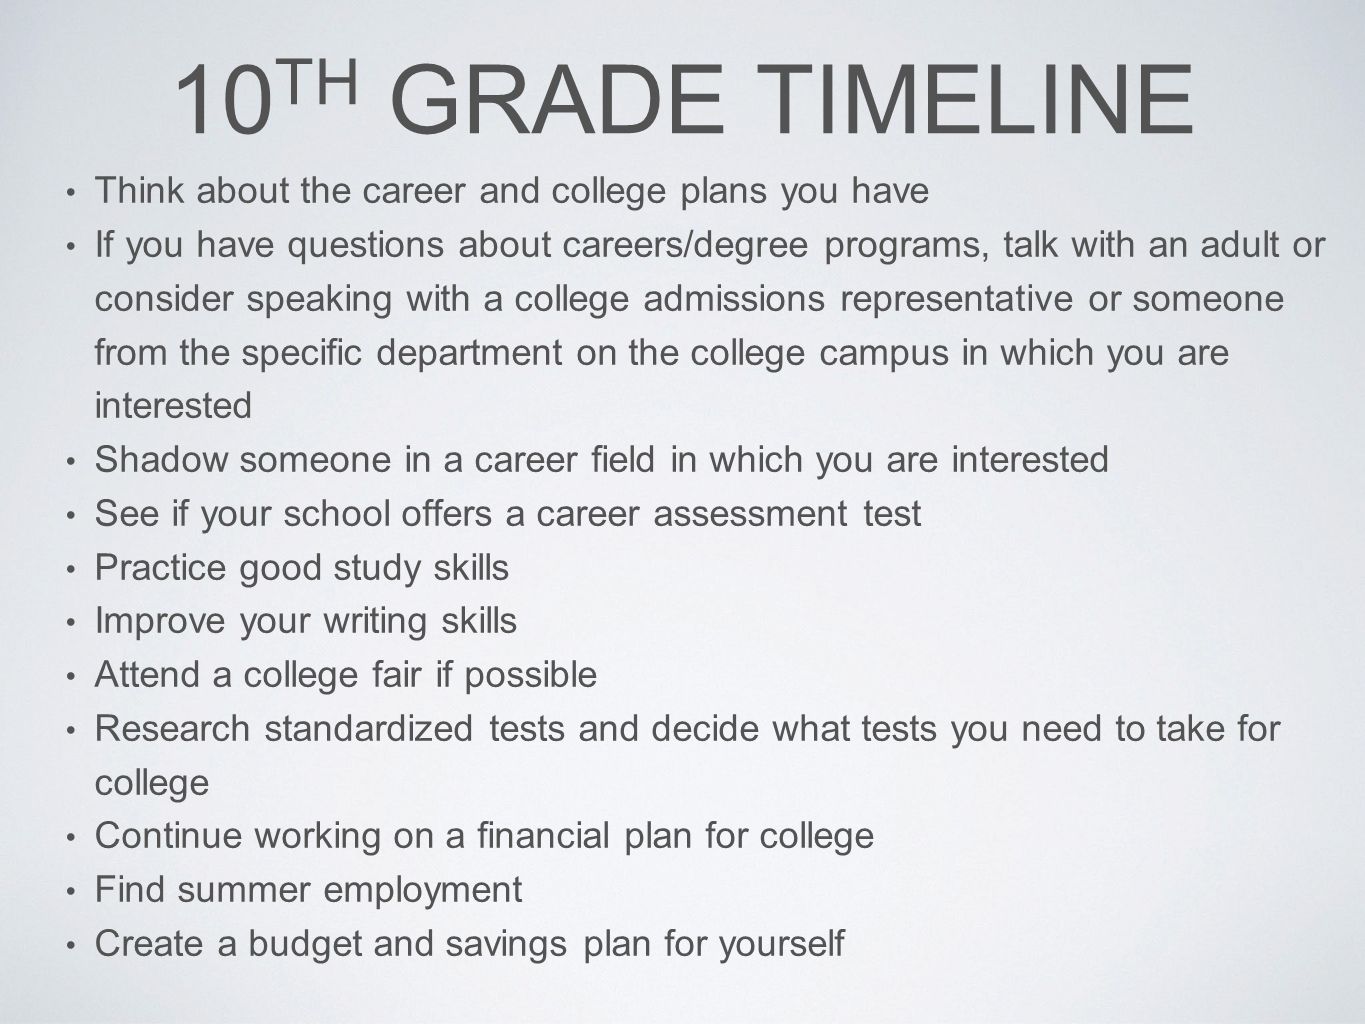 10 TH GRADE TIMELINE Think about the career and college plans you have If you have questions about careers/degree programs, talk with an adult or consider speaking with a college admissions representative or someone from the specific department on the college campus in which you are interested Shadow someone in a career field in which you are interested See if your school offers a career assessment test Practice good study skills Improve your writing skills Attend a college fair if possible Research standardized tests and decide what tests you need to take for college Continue working on a financial plan for college Find summer employment Create a budget and savings plan for yourself